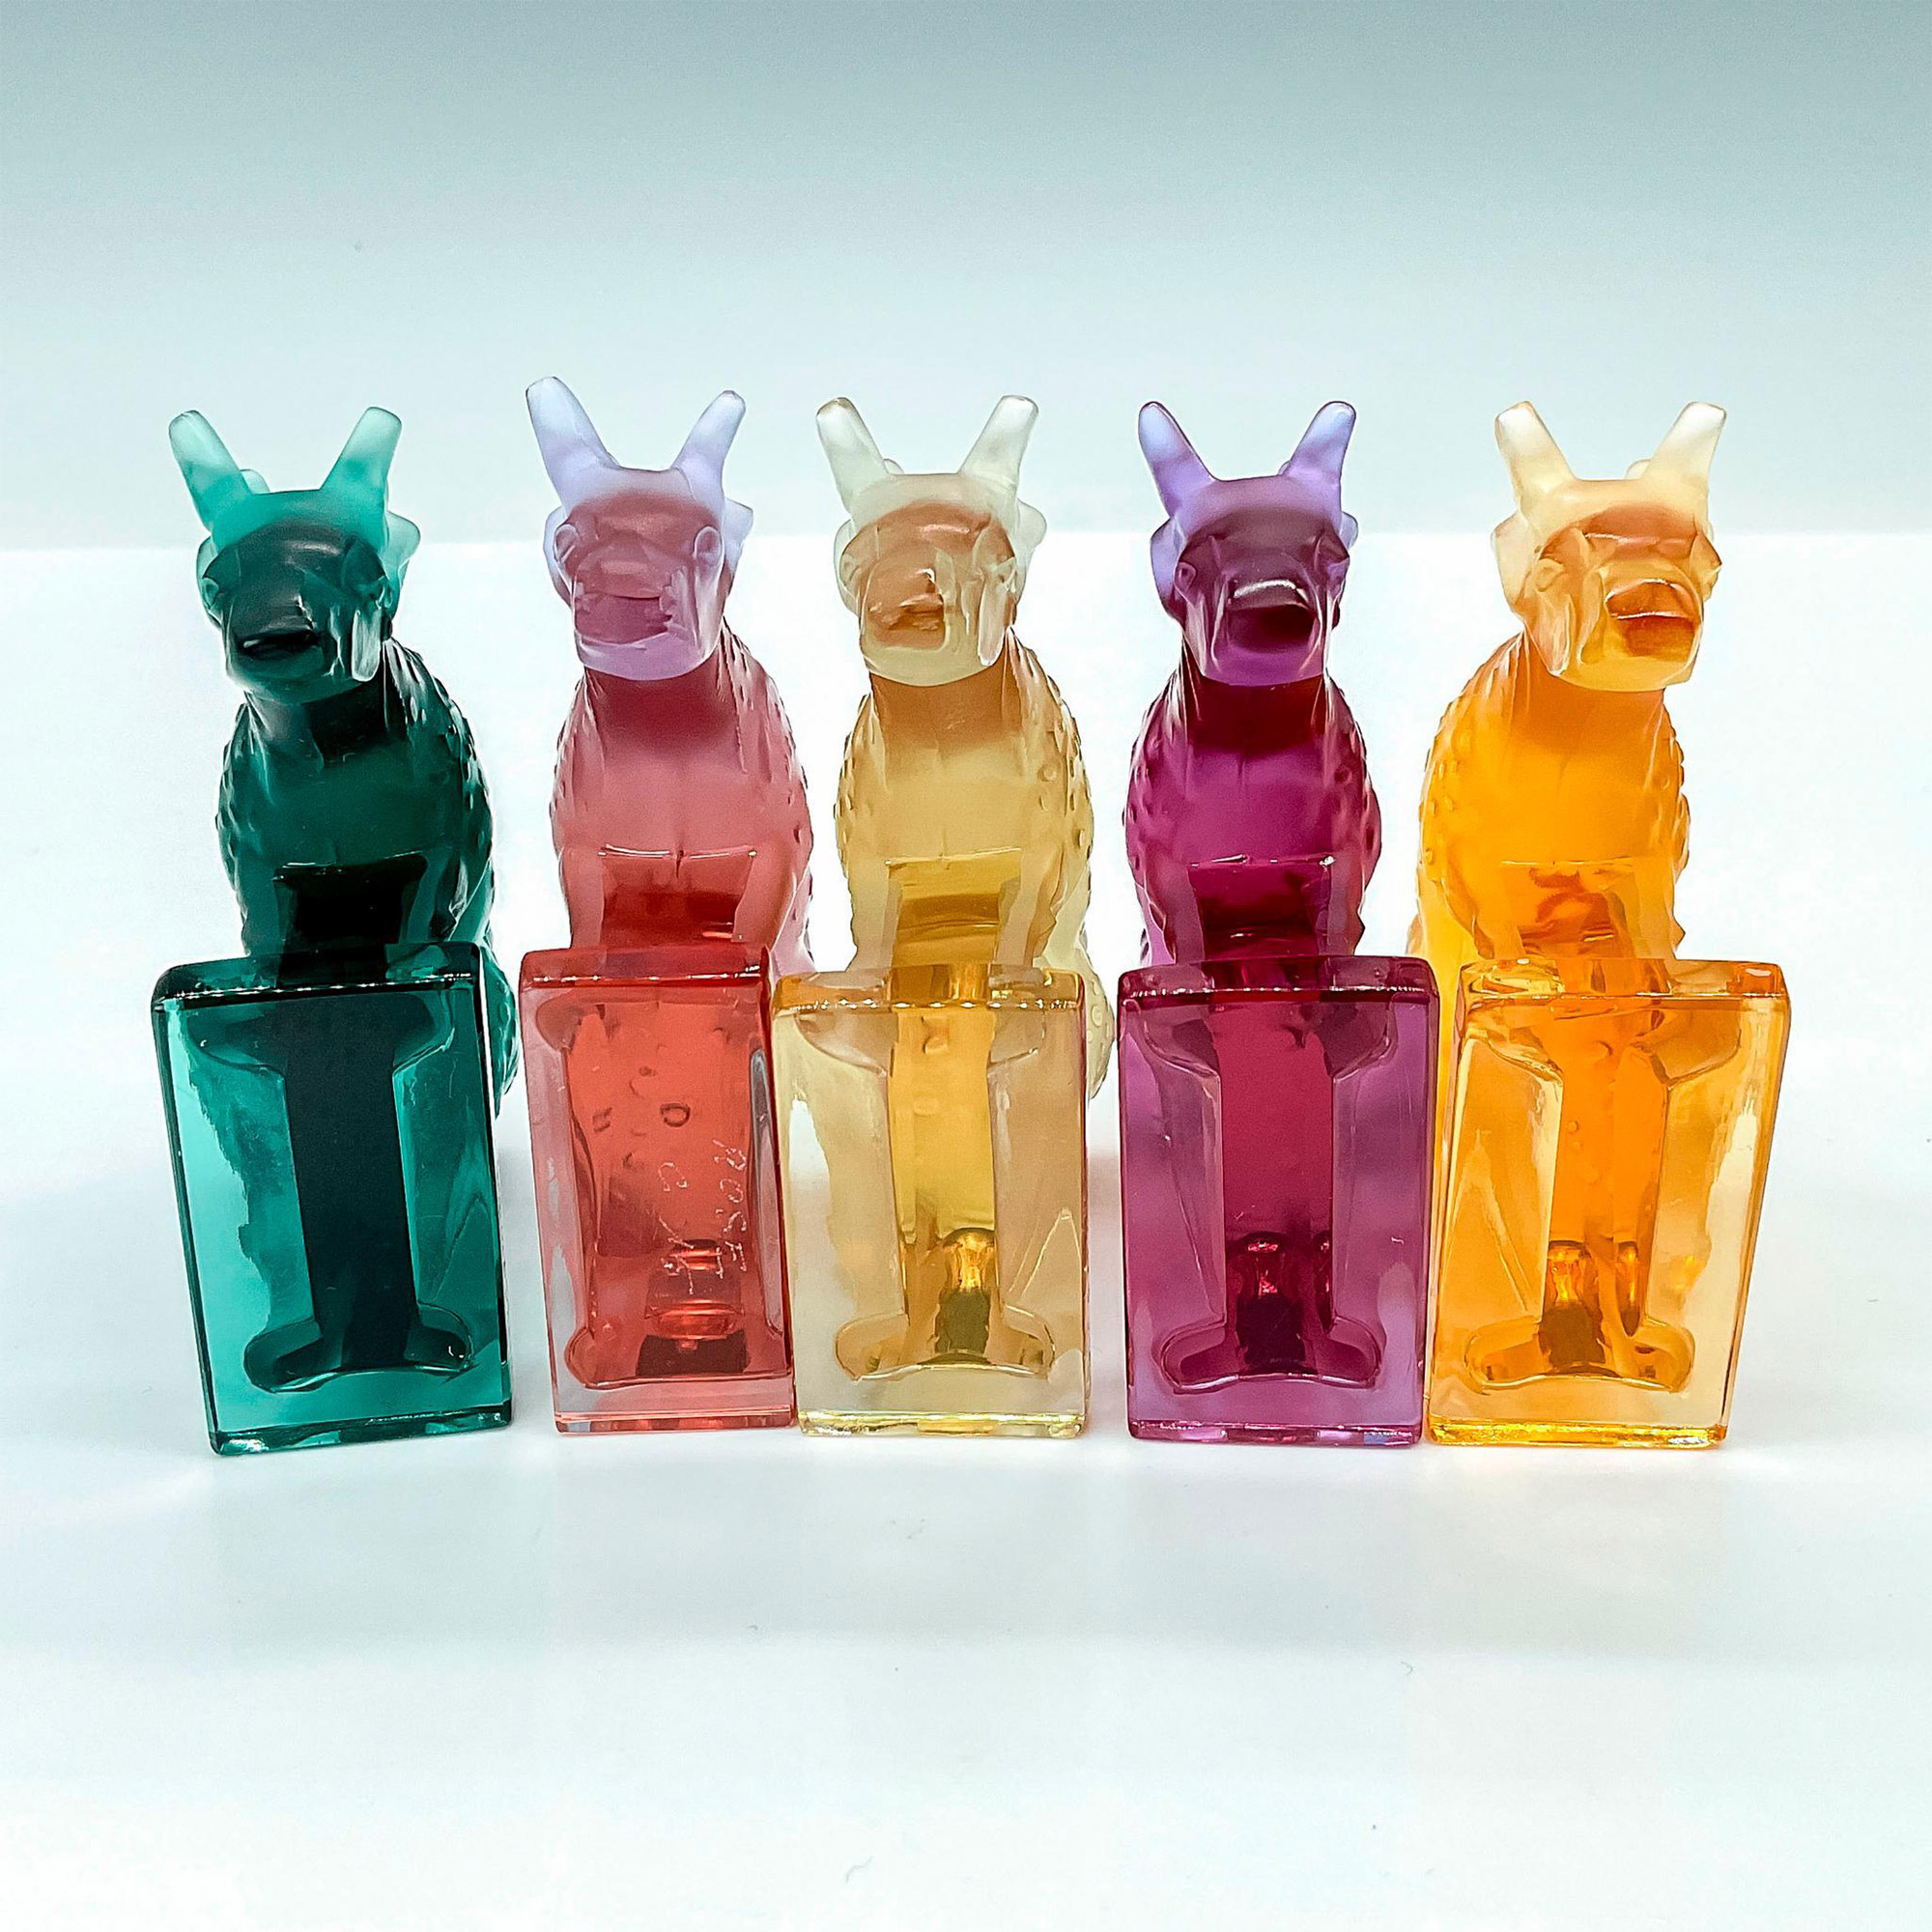 5pc Lalique Crystal Deer Figurines Frosted Color - Image 3 of 3